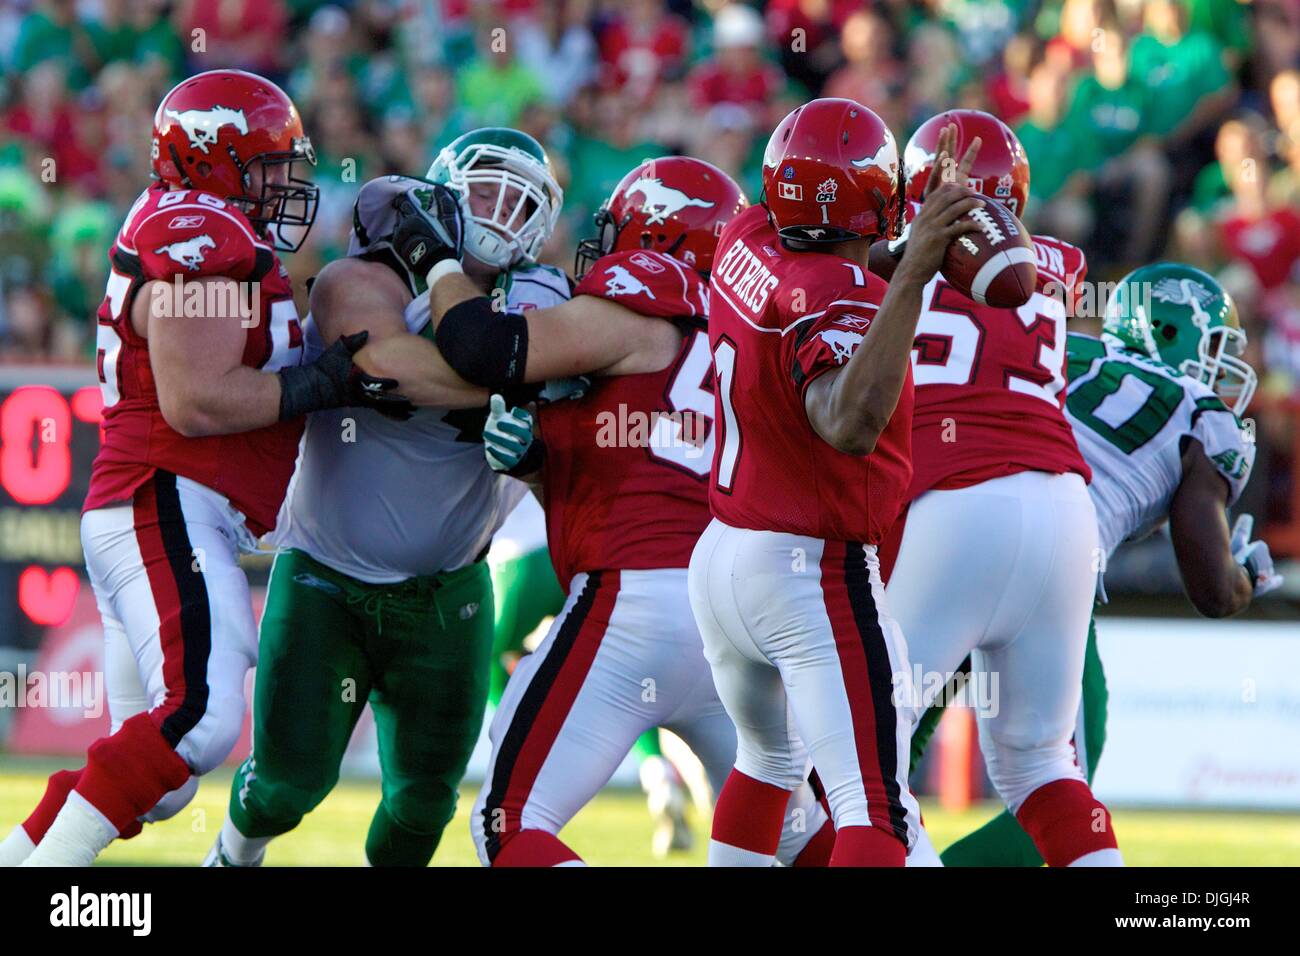 July 24, 2010 - Calgary, Alberta, Canada - 24 July 2010: Calgary Stampeders quarterback Henry Burris (1) looks to make a pass while his teammates offensive linemen Tim O'Neill (66),  Steve Myddelton (59) and Edwin Harrison (53) block a Saskatchewan Roughriders defensive tackle Keith Shologan (74) during a game at McMahon Stadium in Calgary, Alberta..Mandatory Credit: Irena Thompson Stock Photo